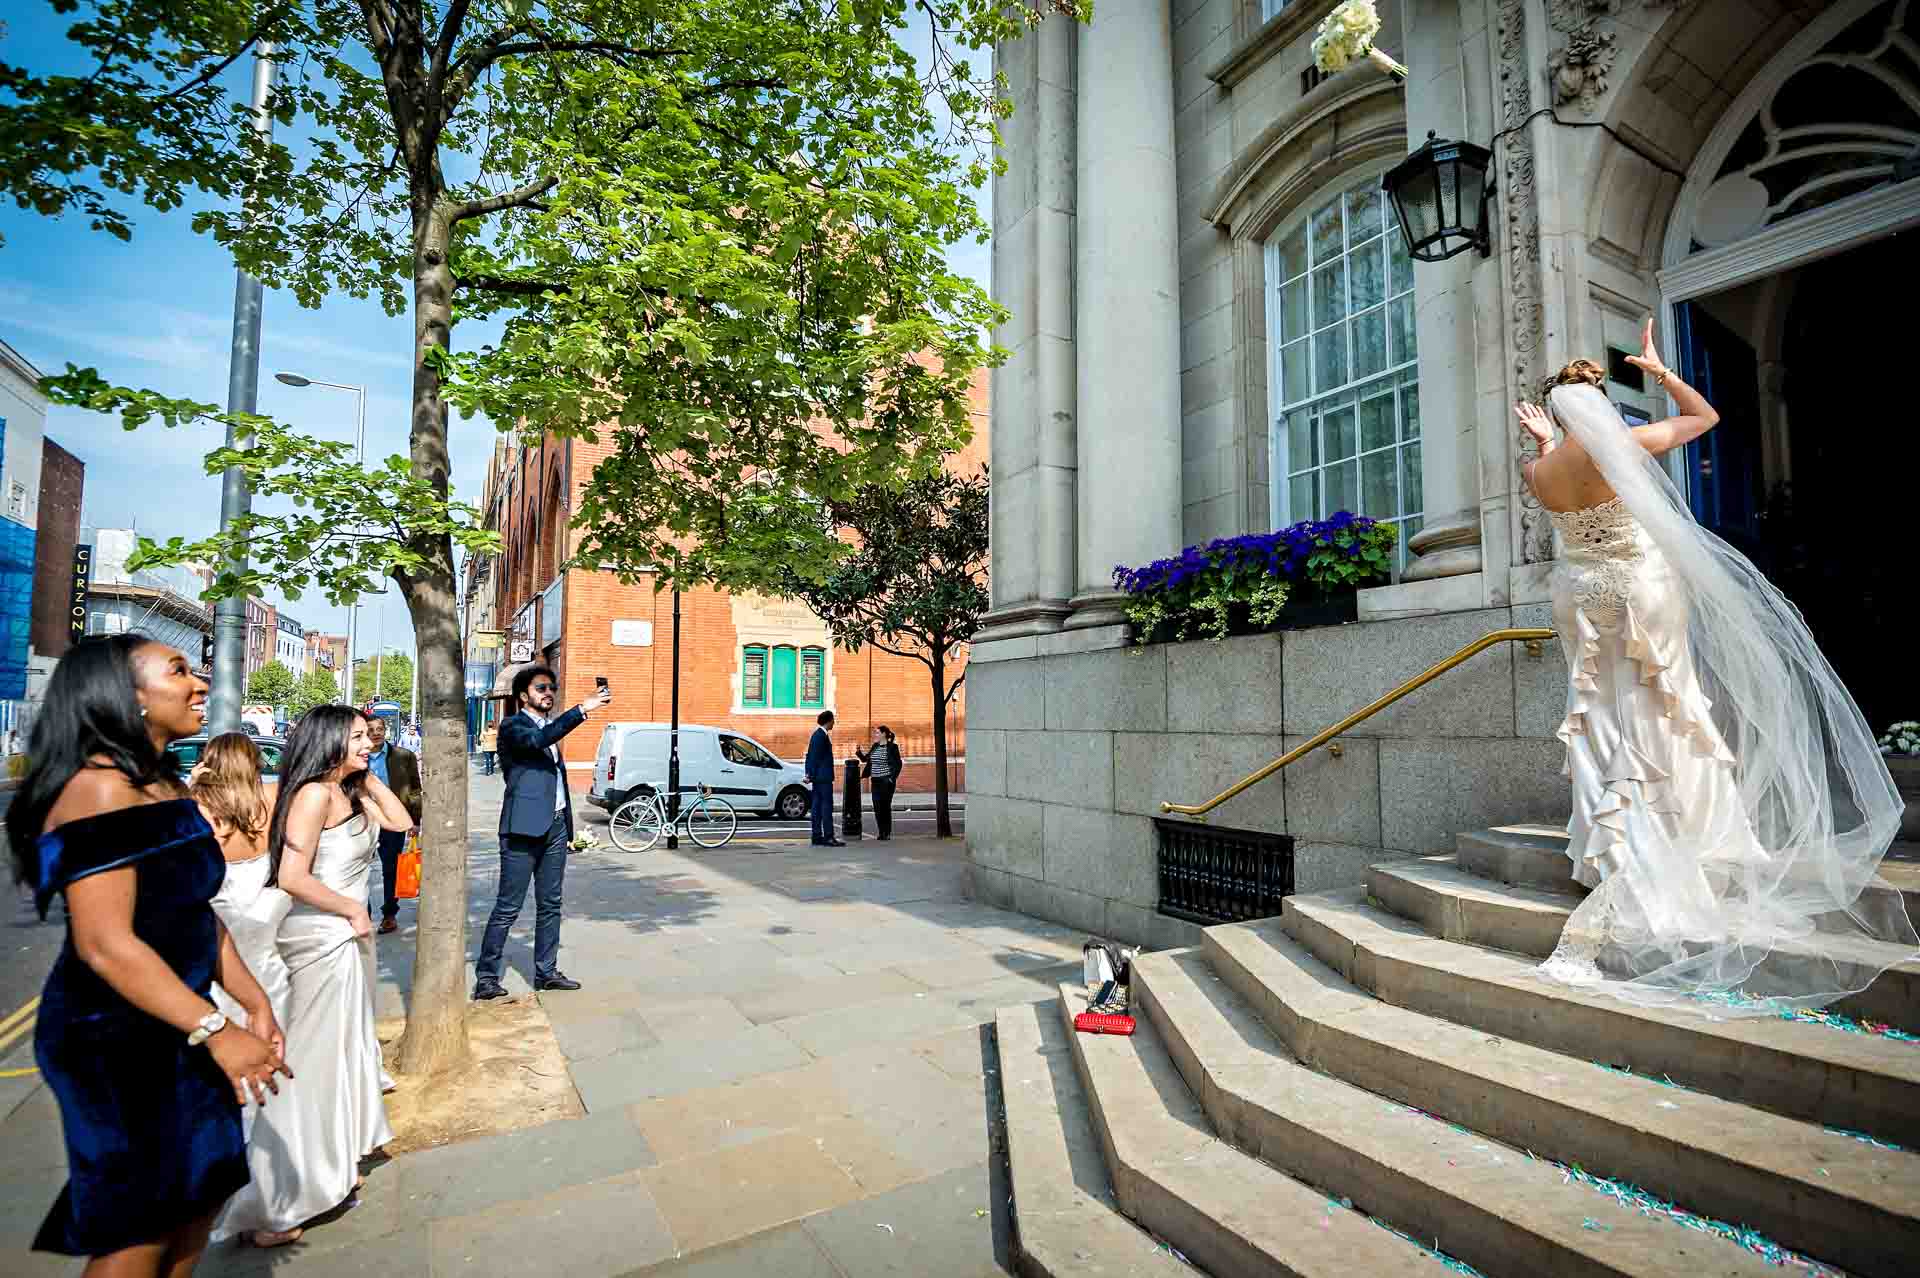 Bride Tossing Bouquet at London Registry Office